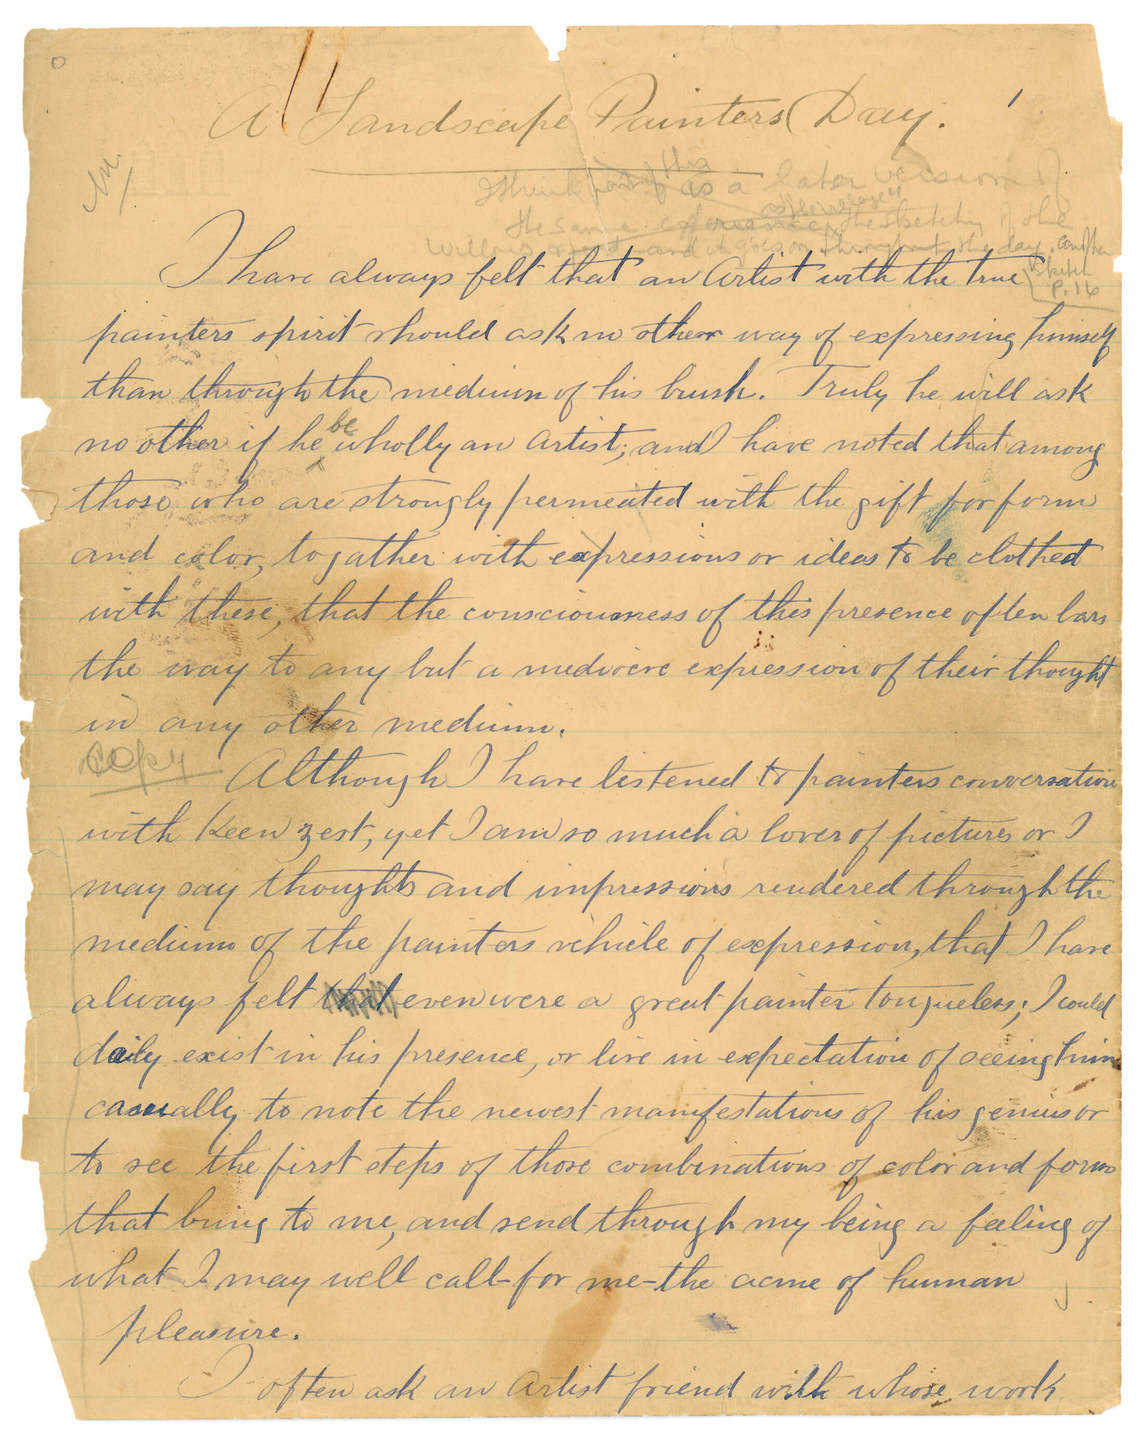 Homer Watson, “A Landscape Painter’s Day,” first page from a prose manuscript, n.d.